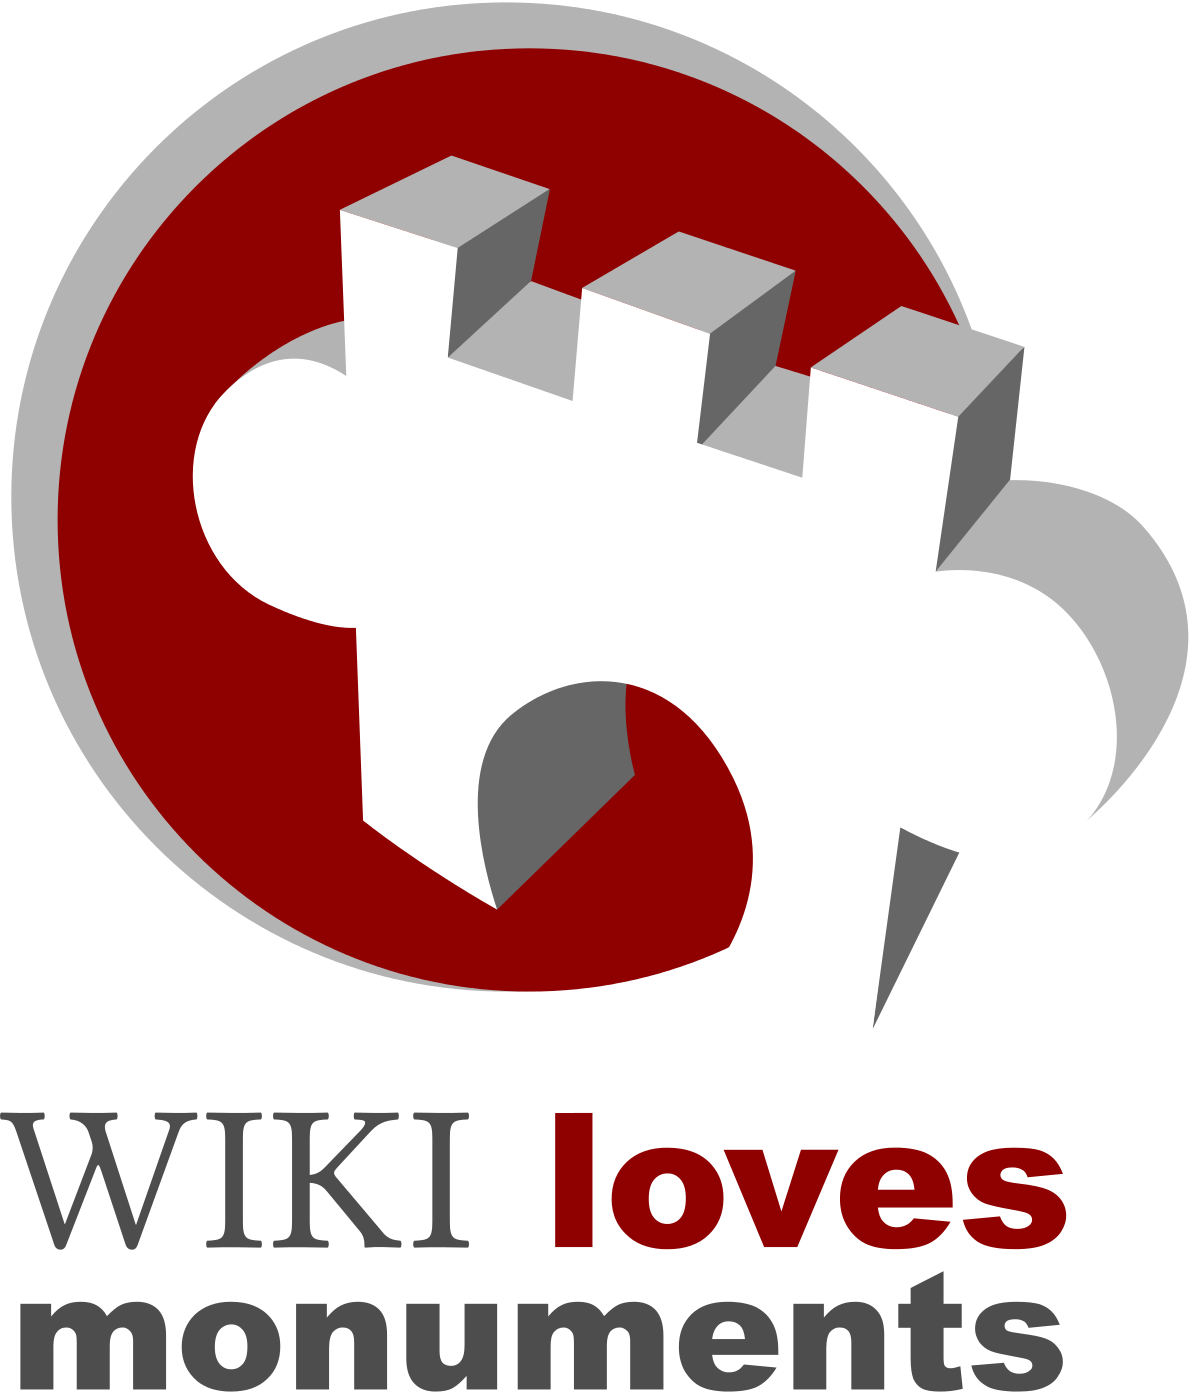 Loves monuments wikipedia . Google clipart wiki